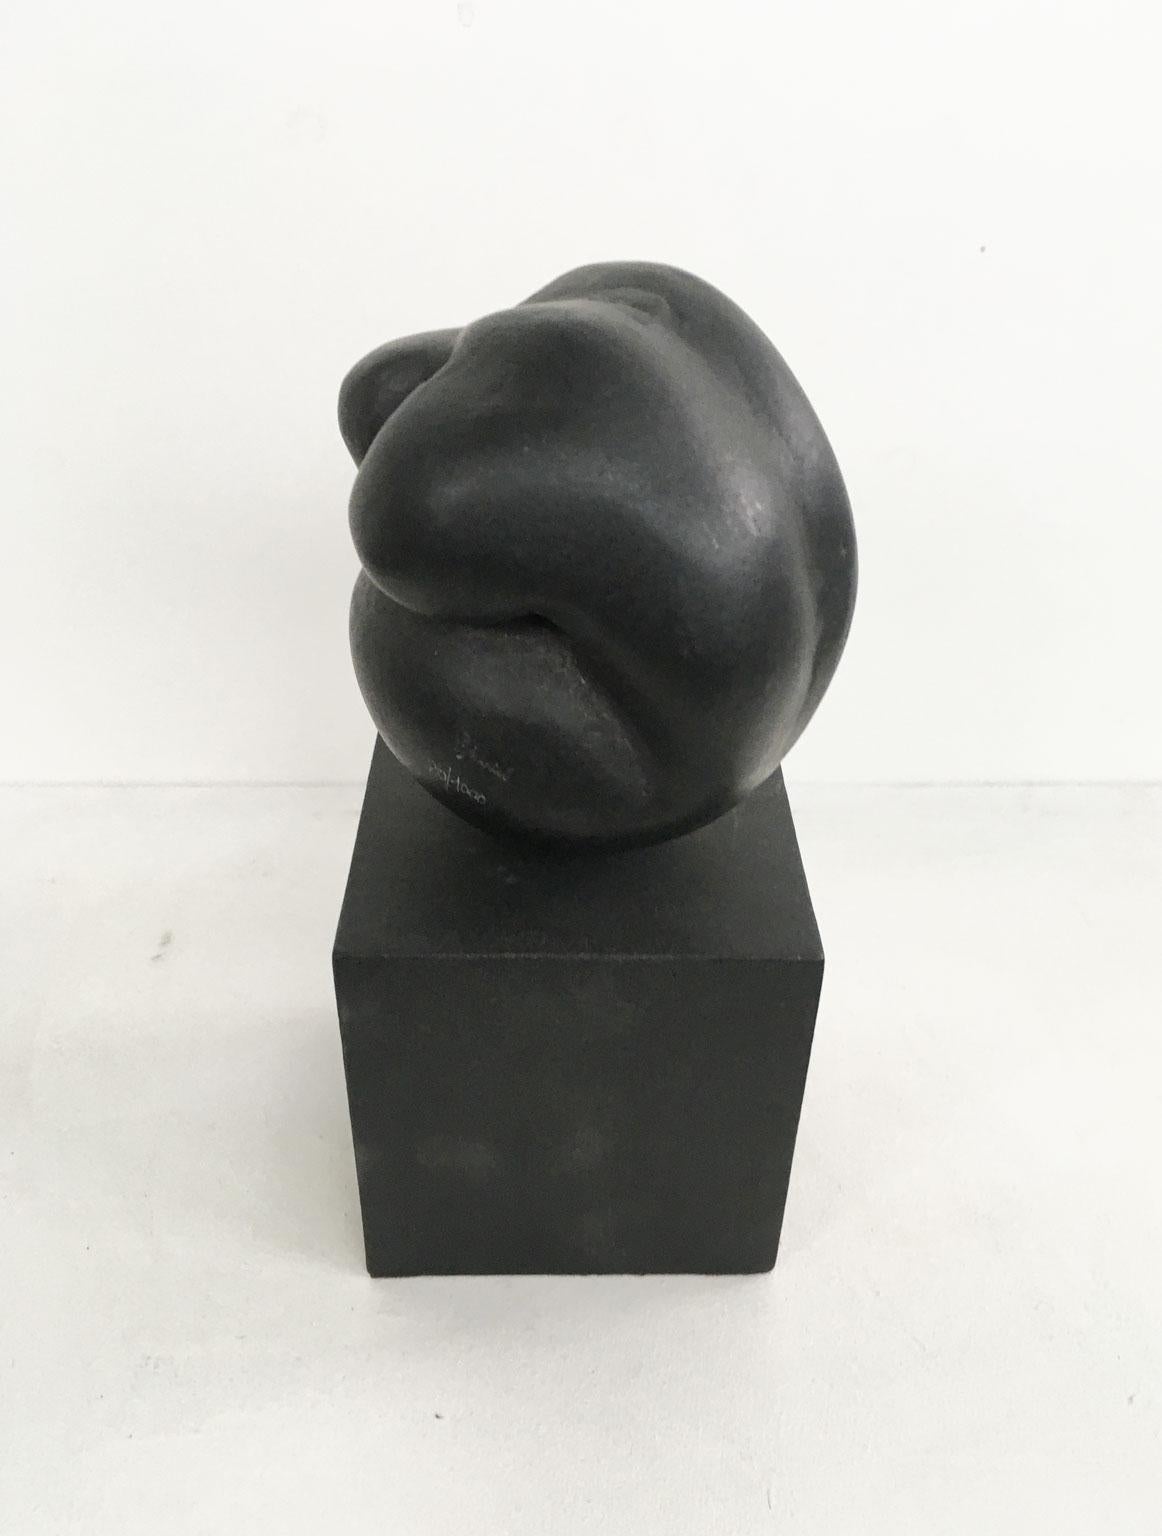 20th Century 1988 Italy Black Aluminum Abstract Sculpture by Patrizia Guerresi Title Deji For Sale